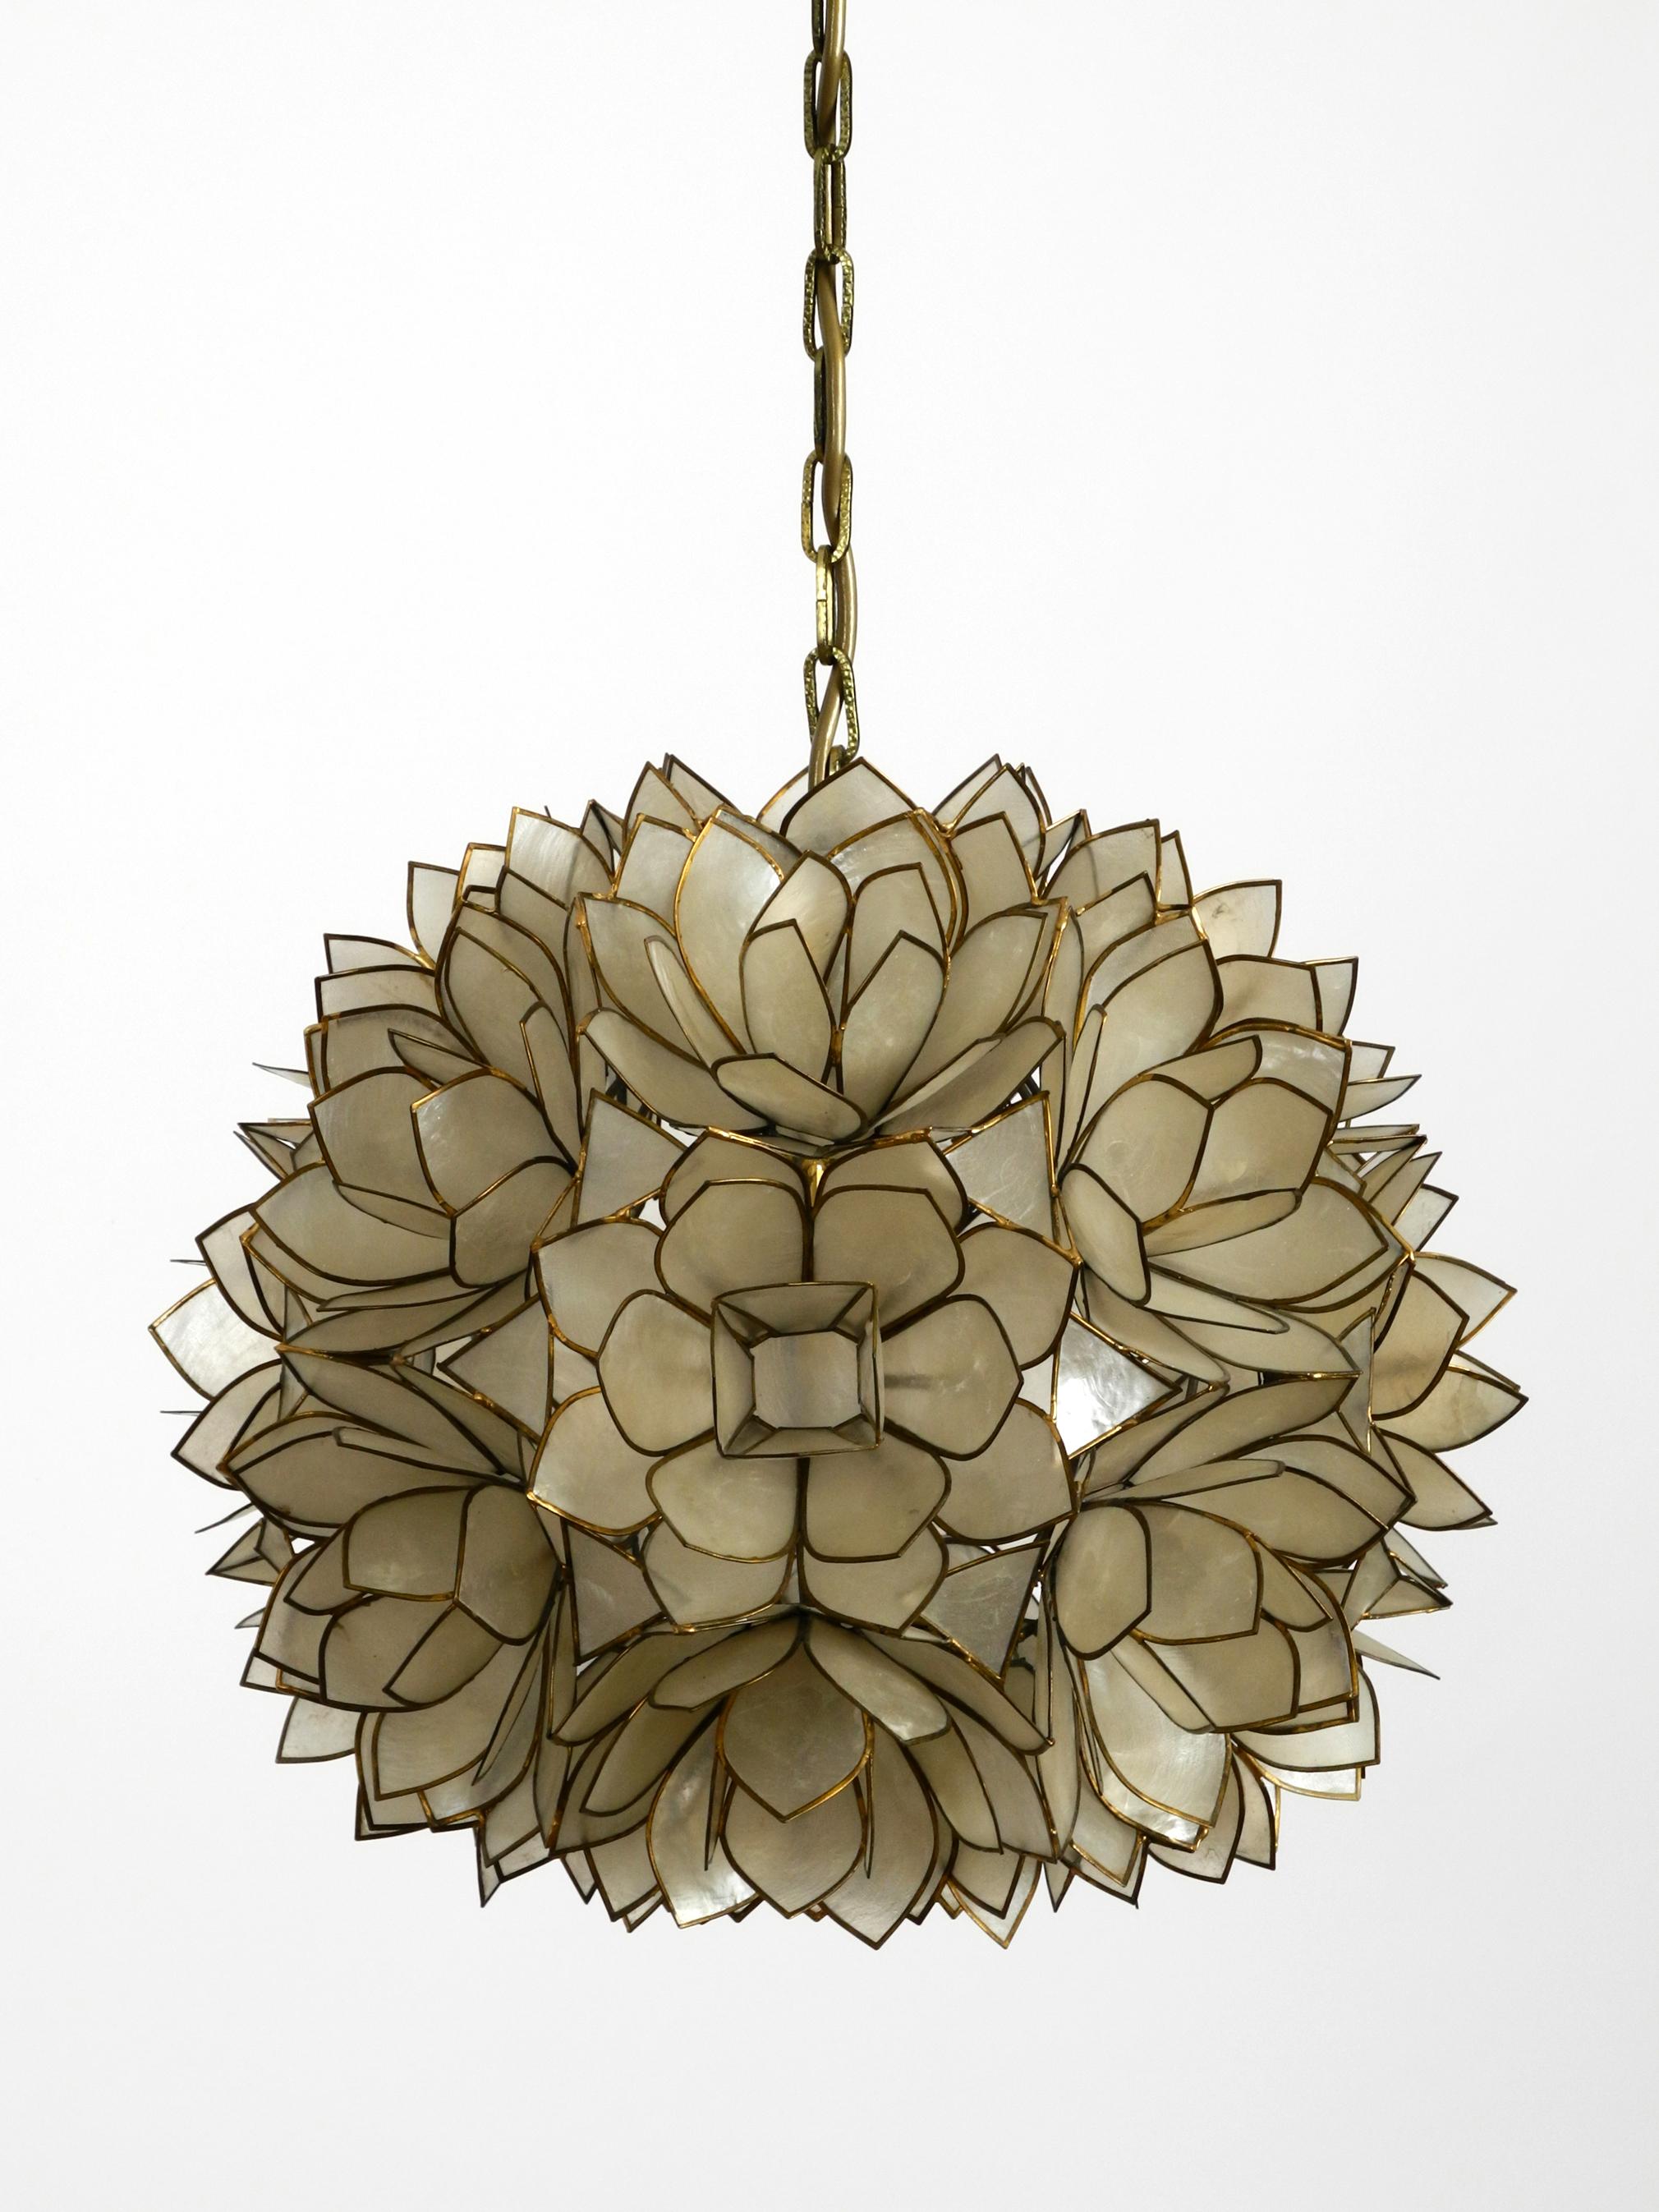 1970s Spherical Pendant Lamp Made of Mother of Pearl in the Look of a Flower 4